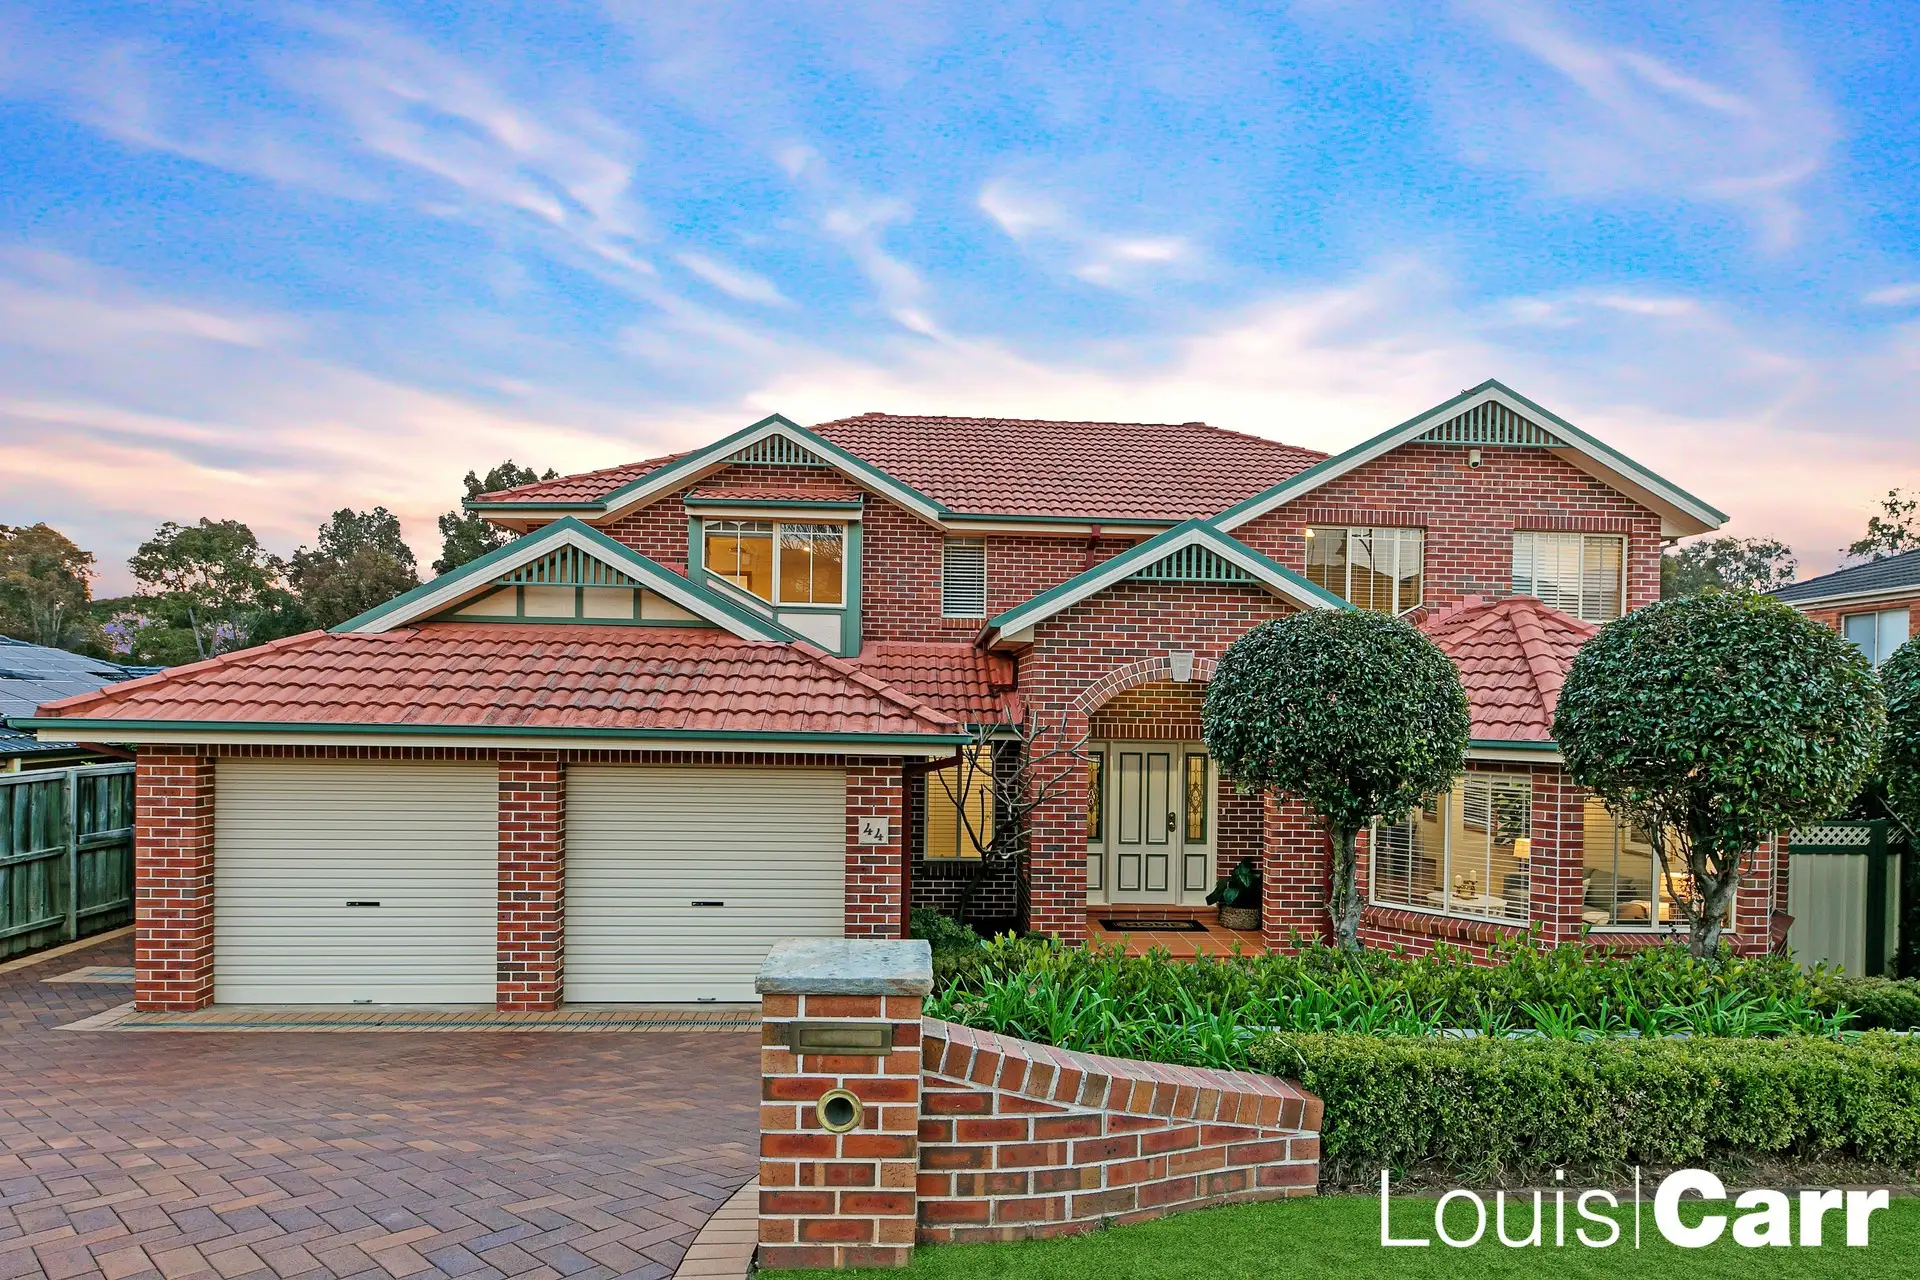 Photo #1: 44 Perisher Road, Beaumont Hills - Sold by Louis Carr Real Estate